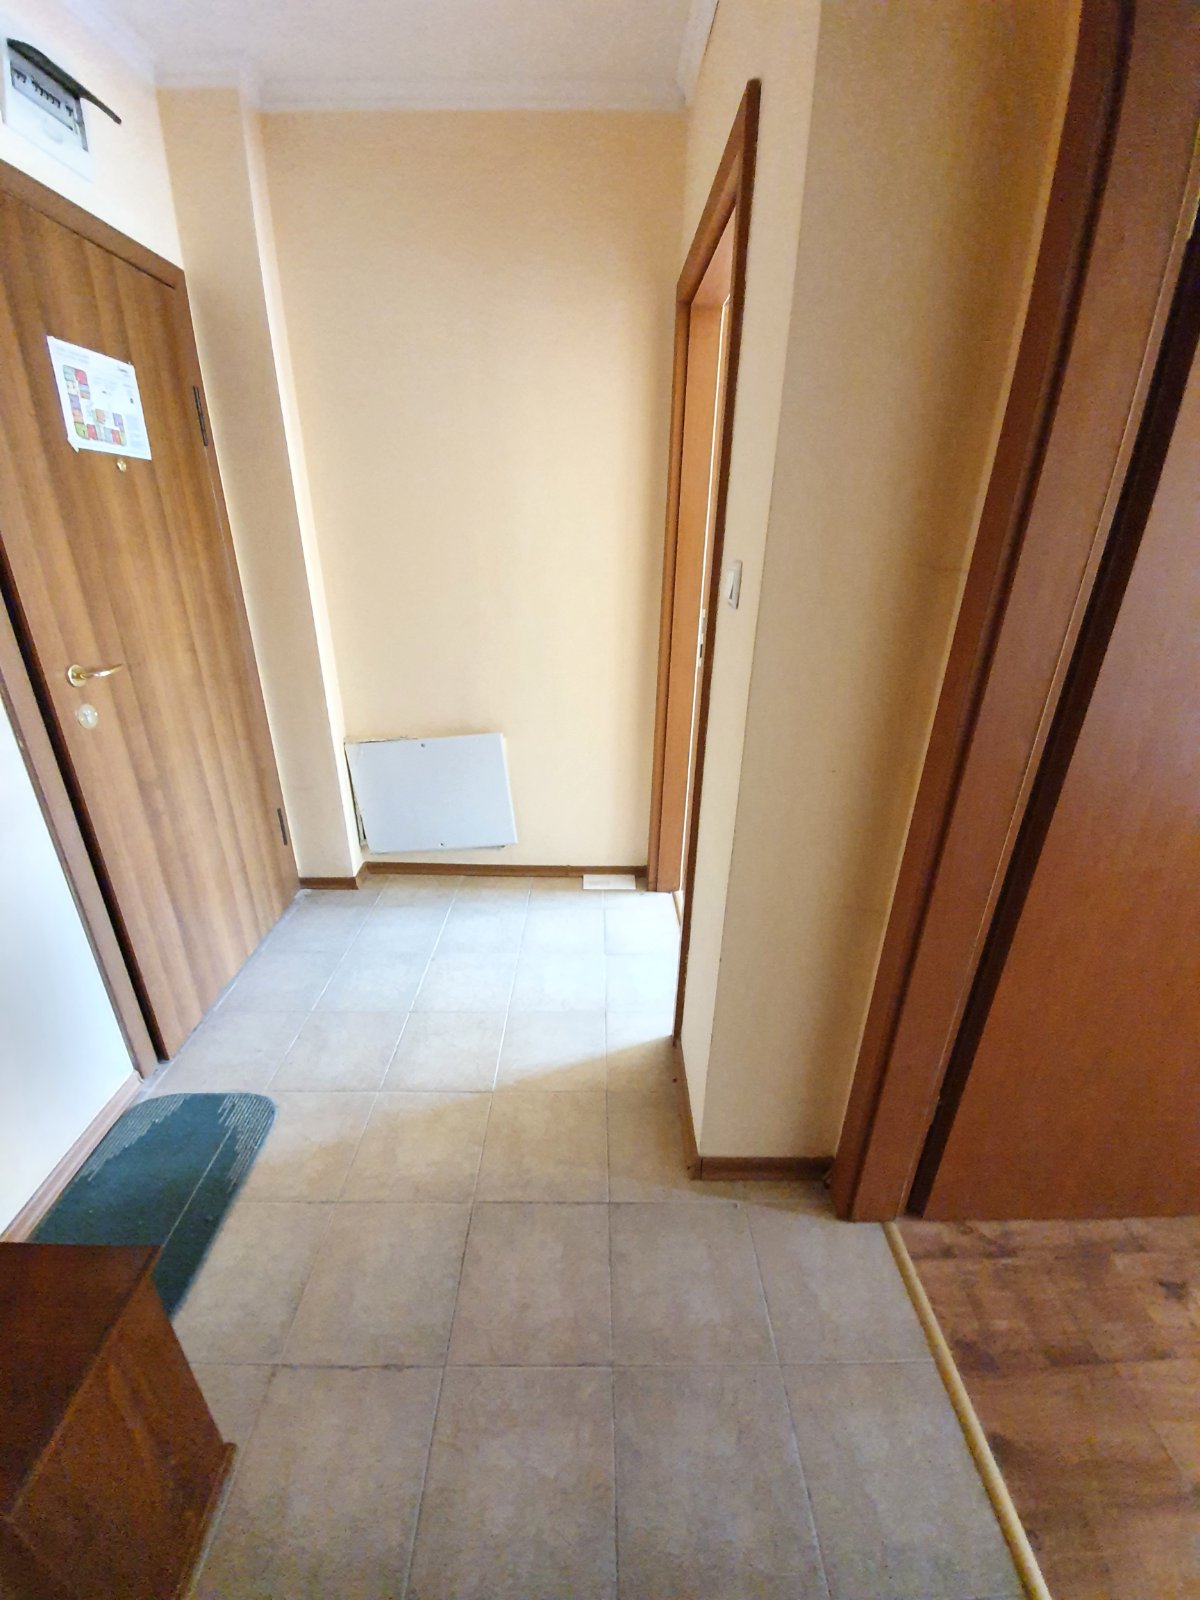 furnished one bedroom apartment for sale in bansko